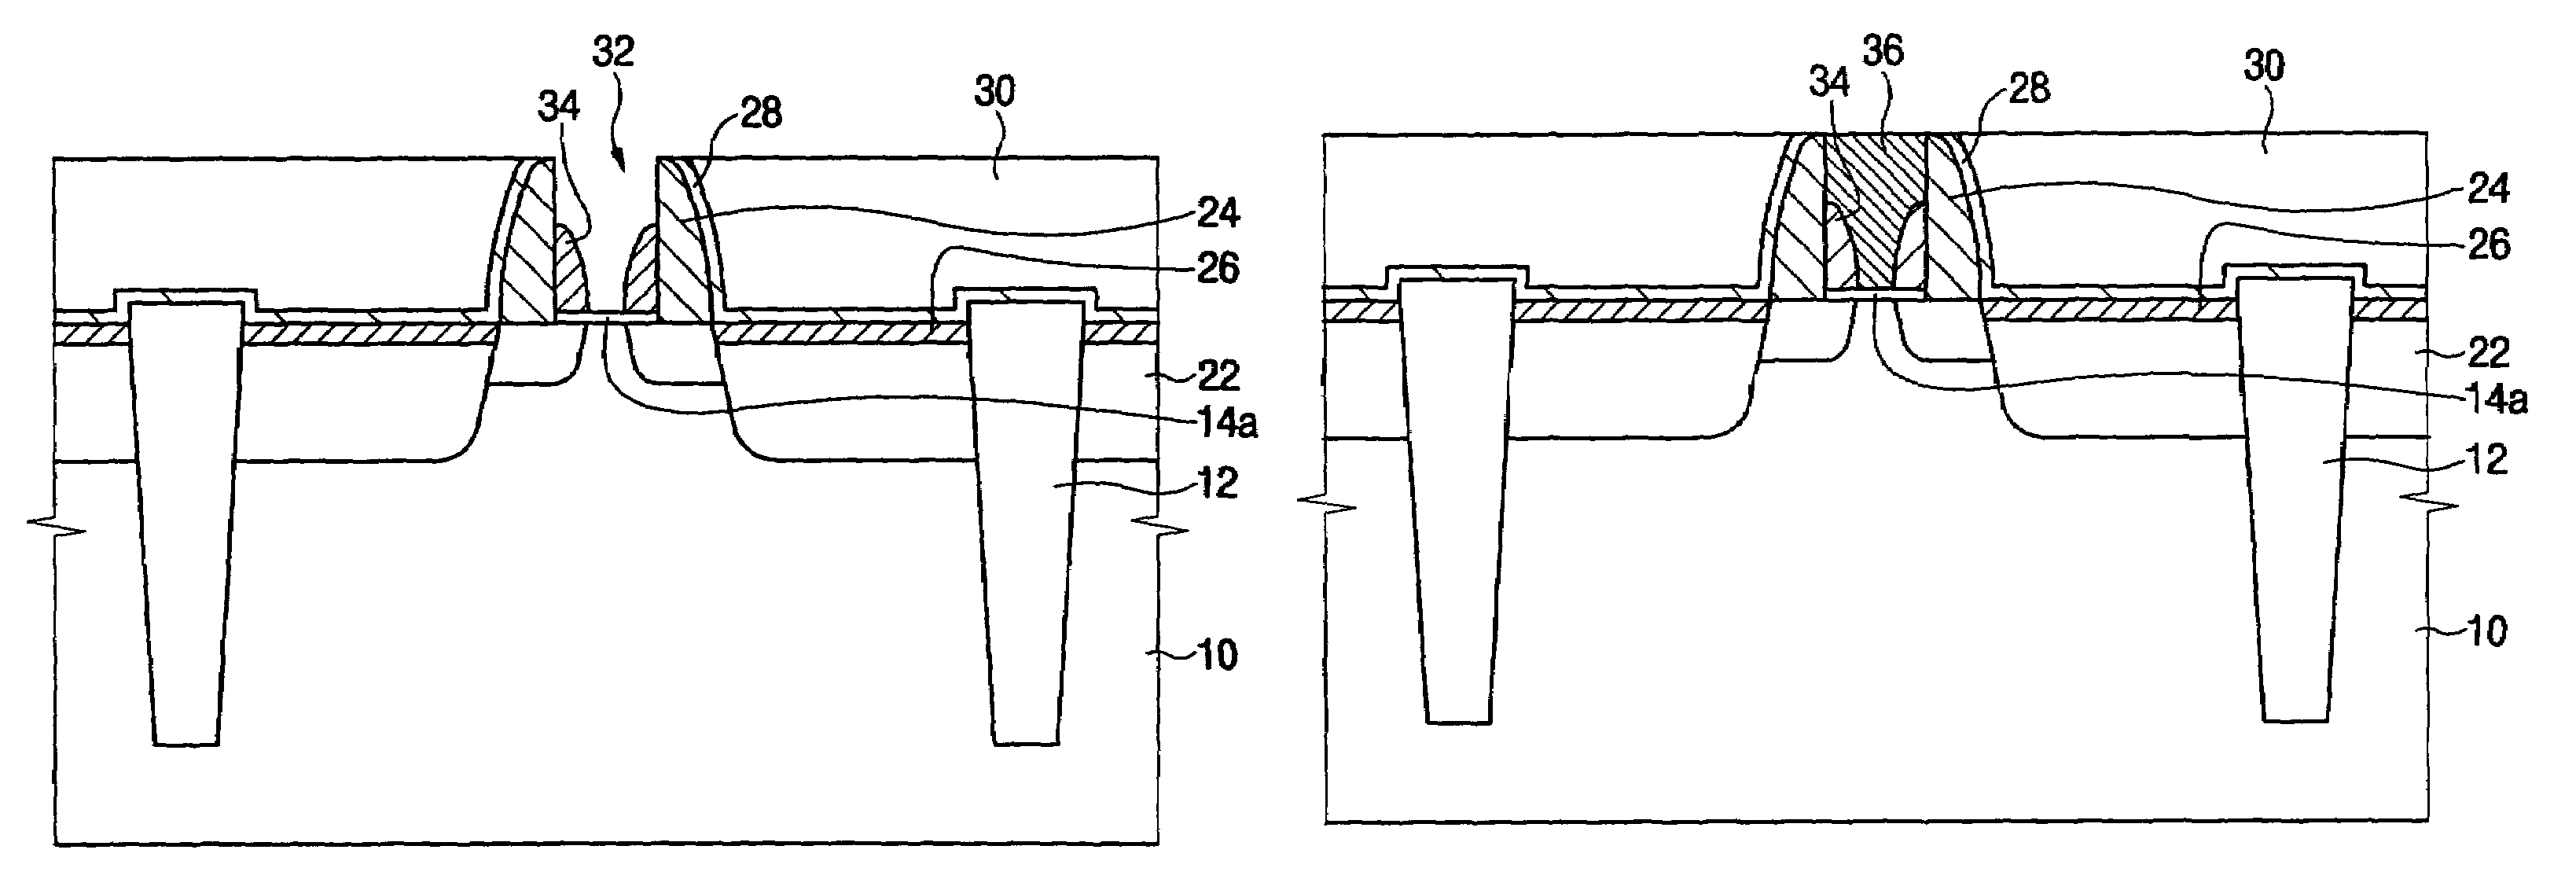 Method of forming a metal gate in a semiconductor device